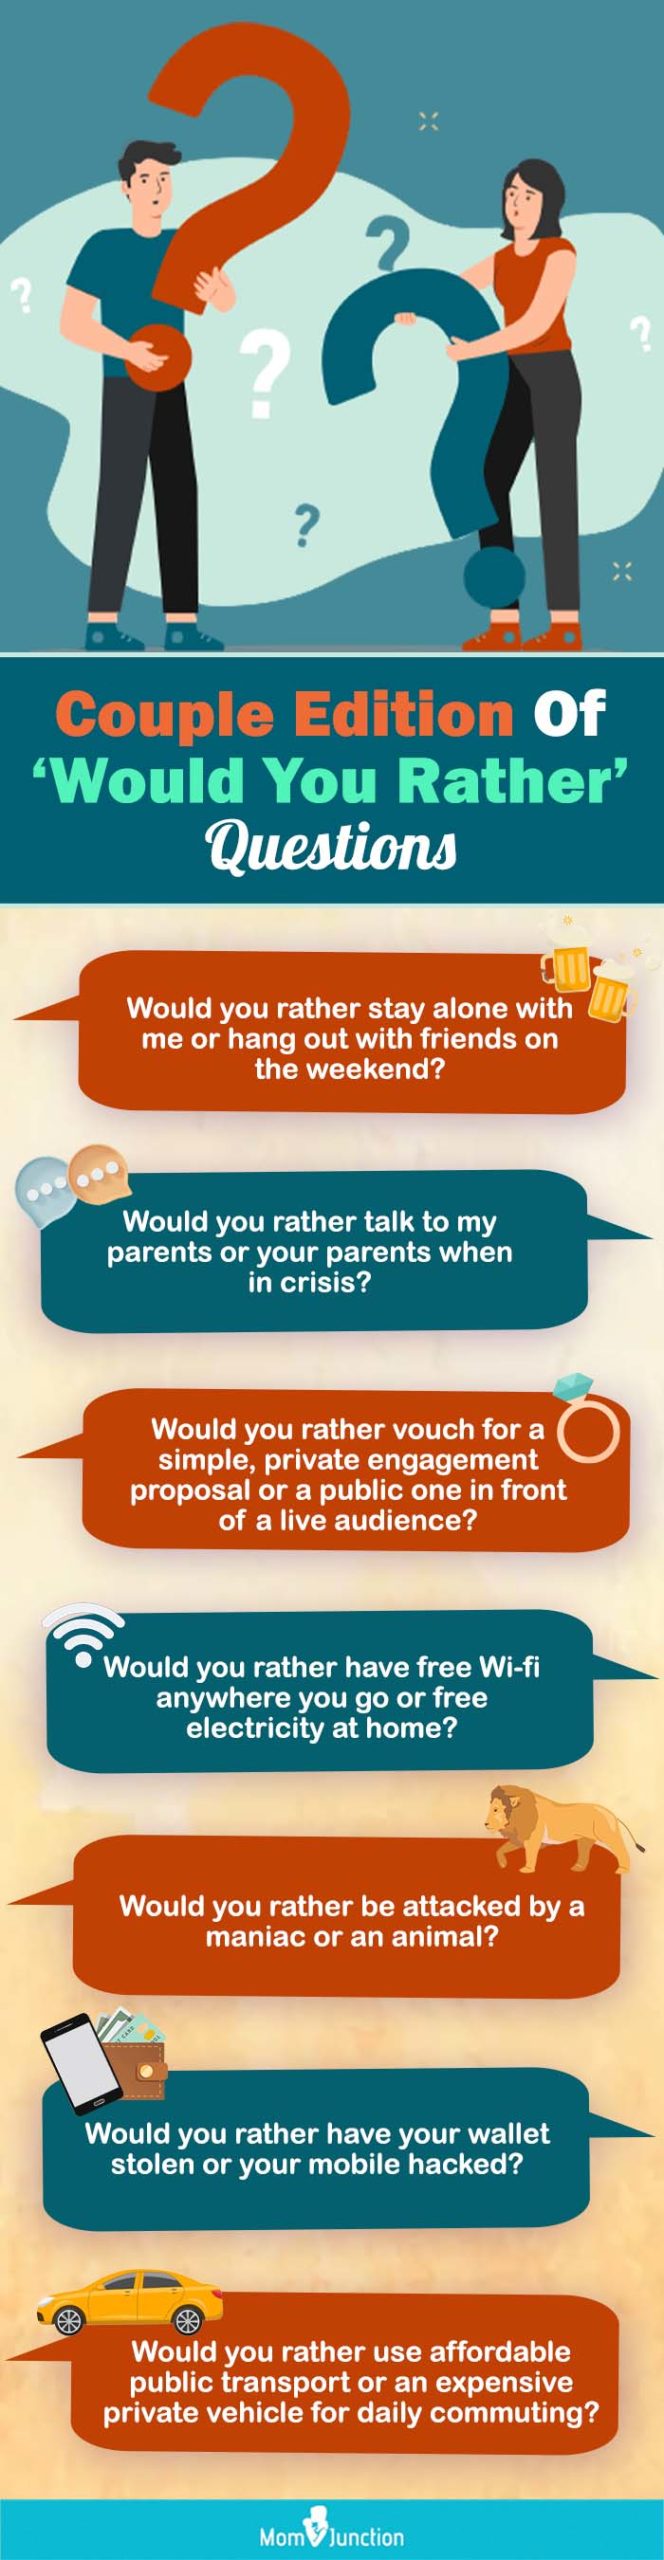 250+ Funny Would You Rather Questions for Kids, Teens and Adults